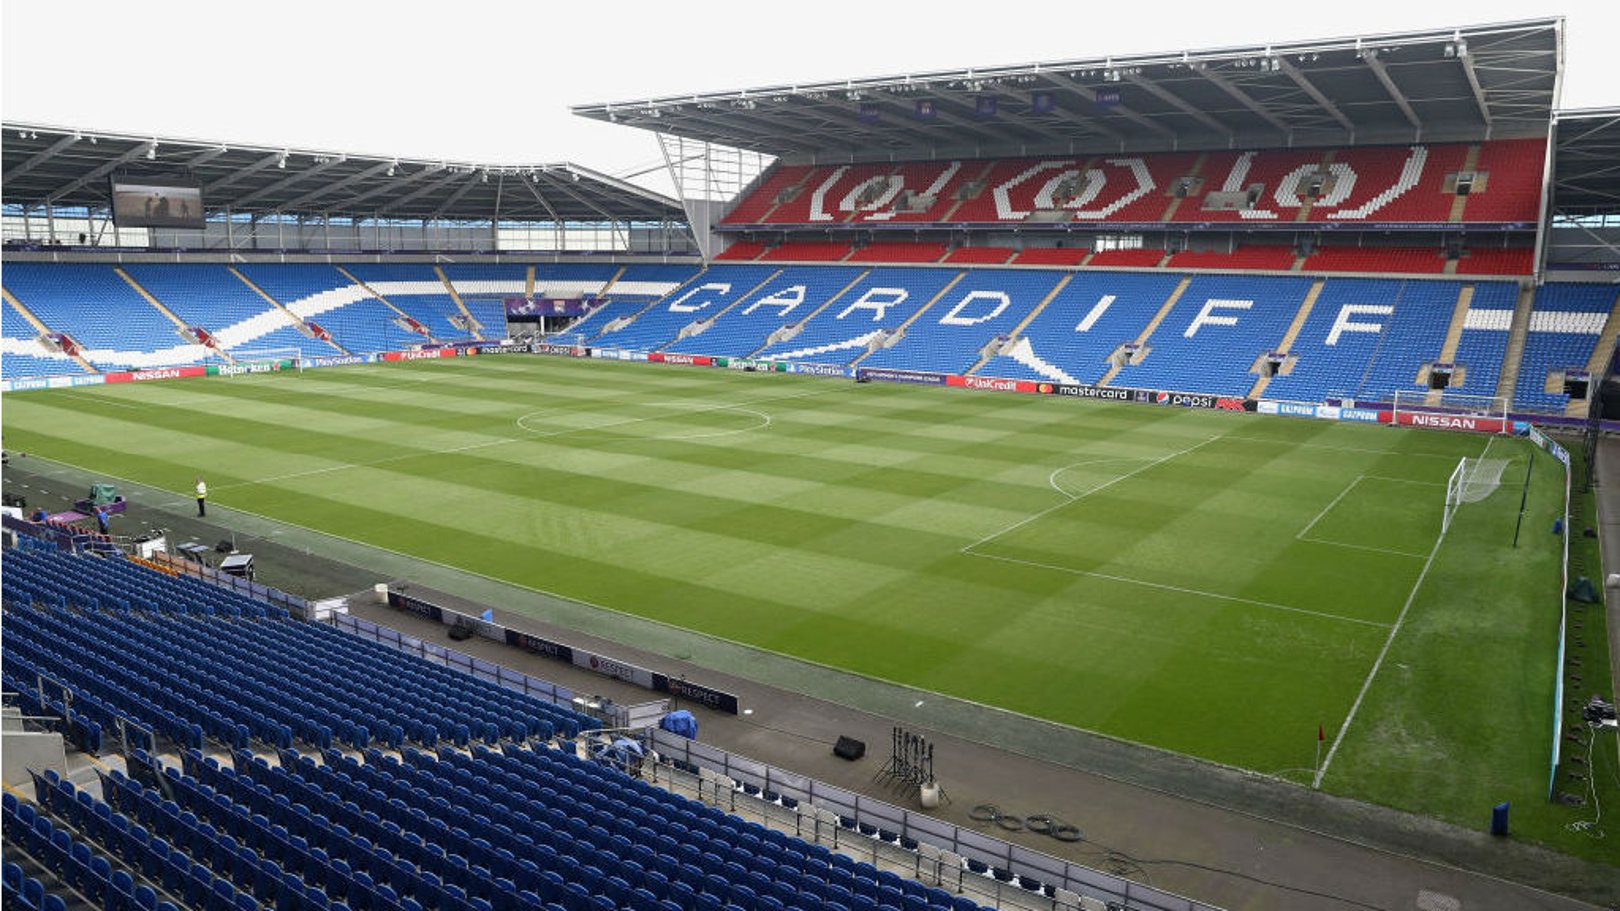 The extended Ninian Stand at Cardiff City Stadium once completed